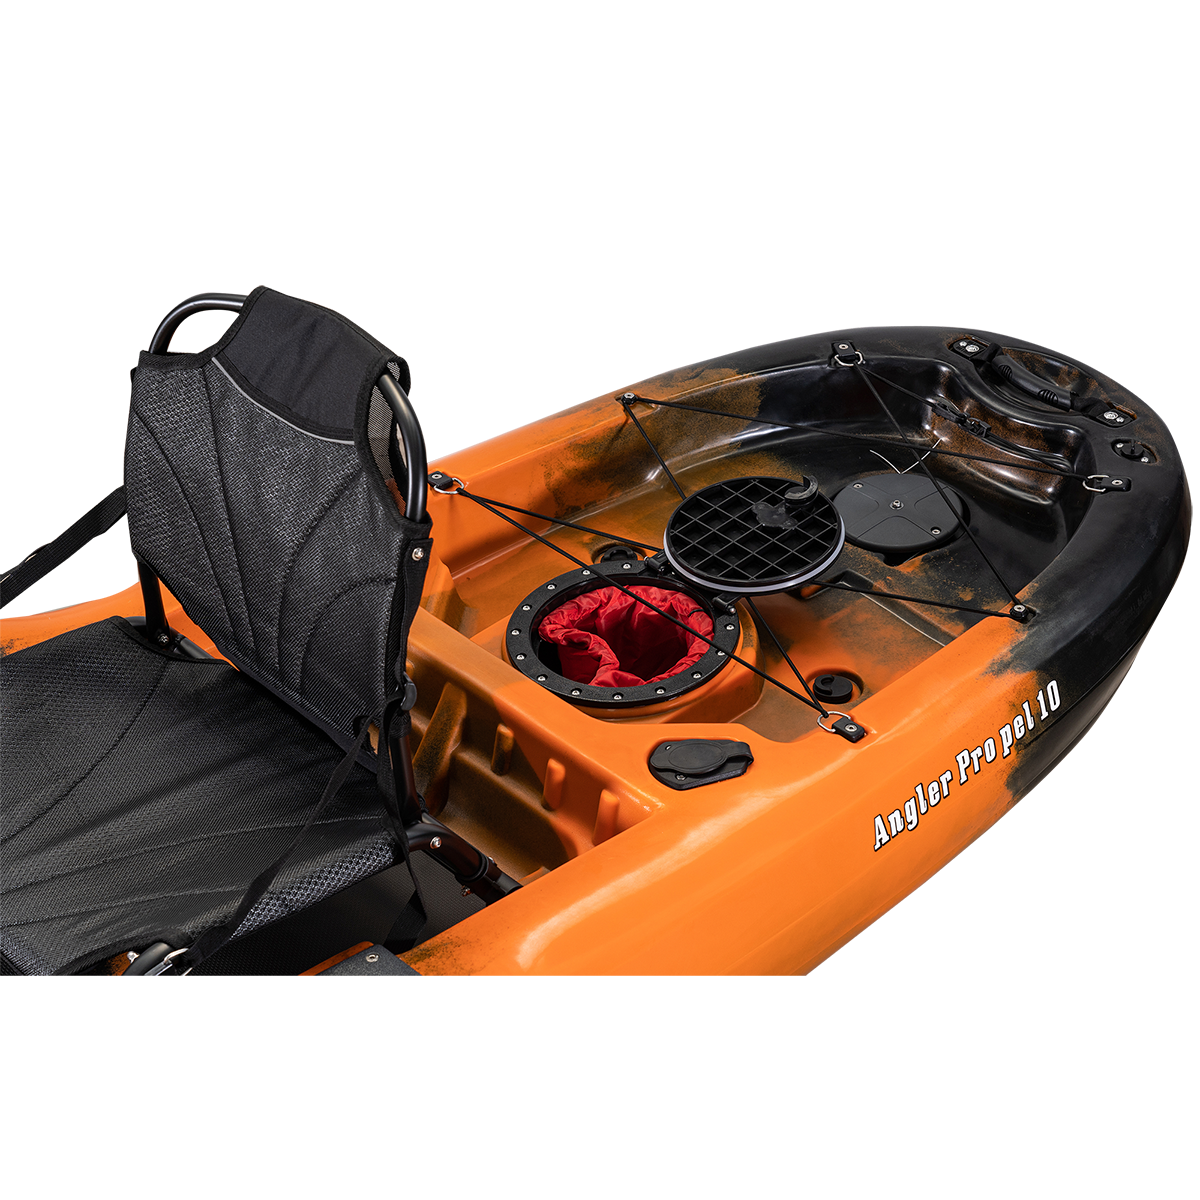 Angler Propel Max 12.5 Pedal Drive Kayak with rudder system – Lakeview